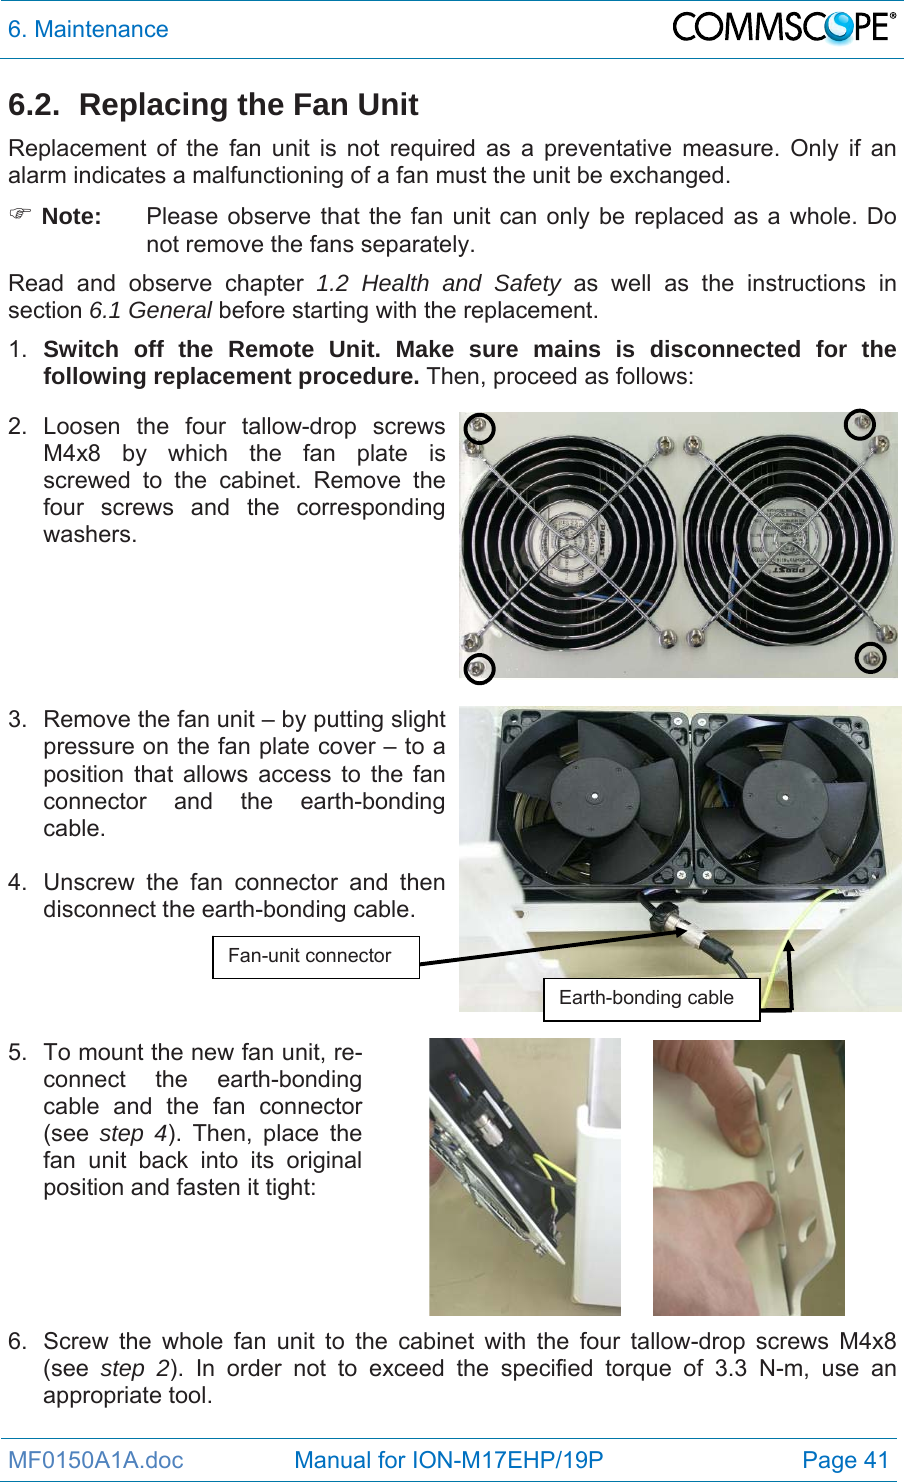 6. Maintenance  MF0150A1A.doc                 Manual for ION-M17EHP/19P  Page 41 6.2.  Replacing the Fan Unit Replacement of the fan unit is not required as a preventative measure. Only if an alarm indicates a malfunctioning of a fan must the unit be exchanged.  Note:  Please observe that the fan unit can only be replaced as a whole. Do not remove the fans separately. Read and observe chapter 1.2 Health and Safety as well as the instructions in section 6.1 General before starting with the replacement.  1.  Switch off the Remote Unit. Make sure mains is disconnected for the following replacement procedure. Then, proceed as follows: 2. Loosen the four tallow-drop screws M4x8 by which the fan plate is screwed to the cabinet. Remove the four screws and the corresponding washers.    3.  Remove the fan unit – by putting slight pressure on the fan plate cover – to a position that allows access to the fan connector and the earth-bonding cable.   4.  Unscrew the fan connector and then disconnect the earth-bonding cable.    5.  To mount the new fan unit, re-connect the earth-bonding cable and the fan connector (see  step 4). Then, place the fan unit back into its original position and fasten it tight:       6.  Screw the whole fan unit to the cabinet with the four tallow-drop screws M4x8 (see  step 2). In order not to exceed the specified torque of 3.3 N-m, use an appropriate tool.  Fan-unit connector Earth-bonding cable 